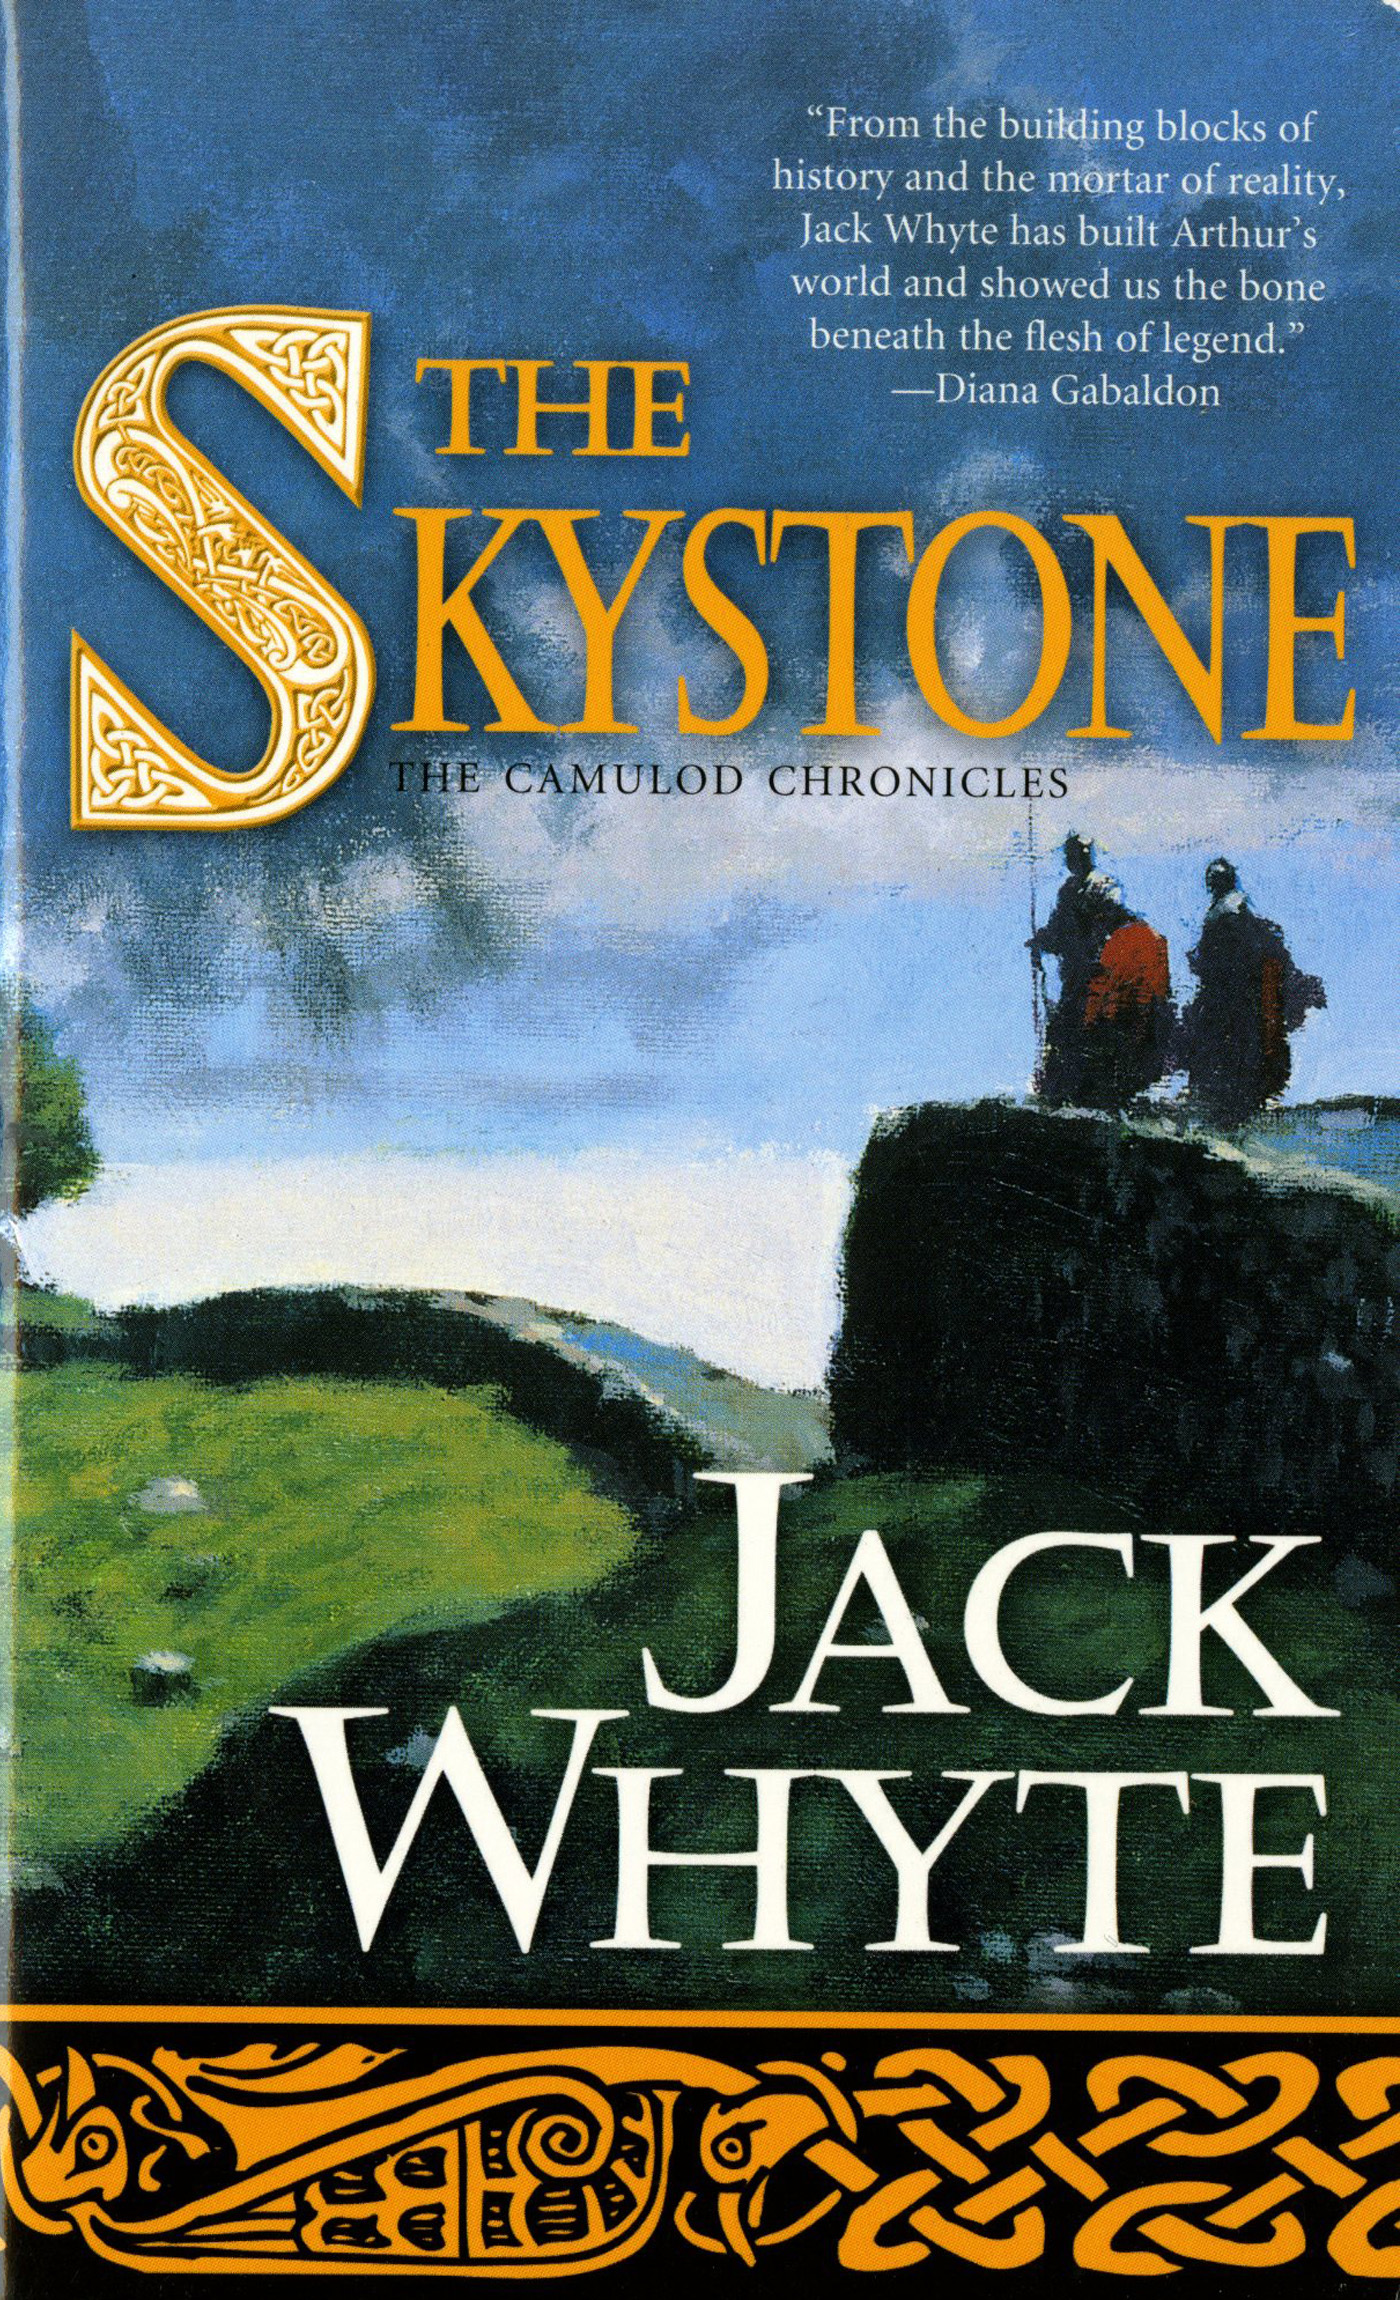 The Skystone : The Dream of Eagles Vol. 1 by Jack Whyte